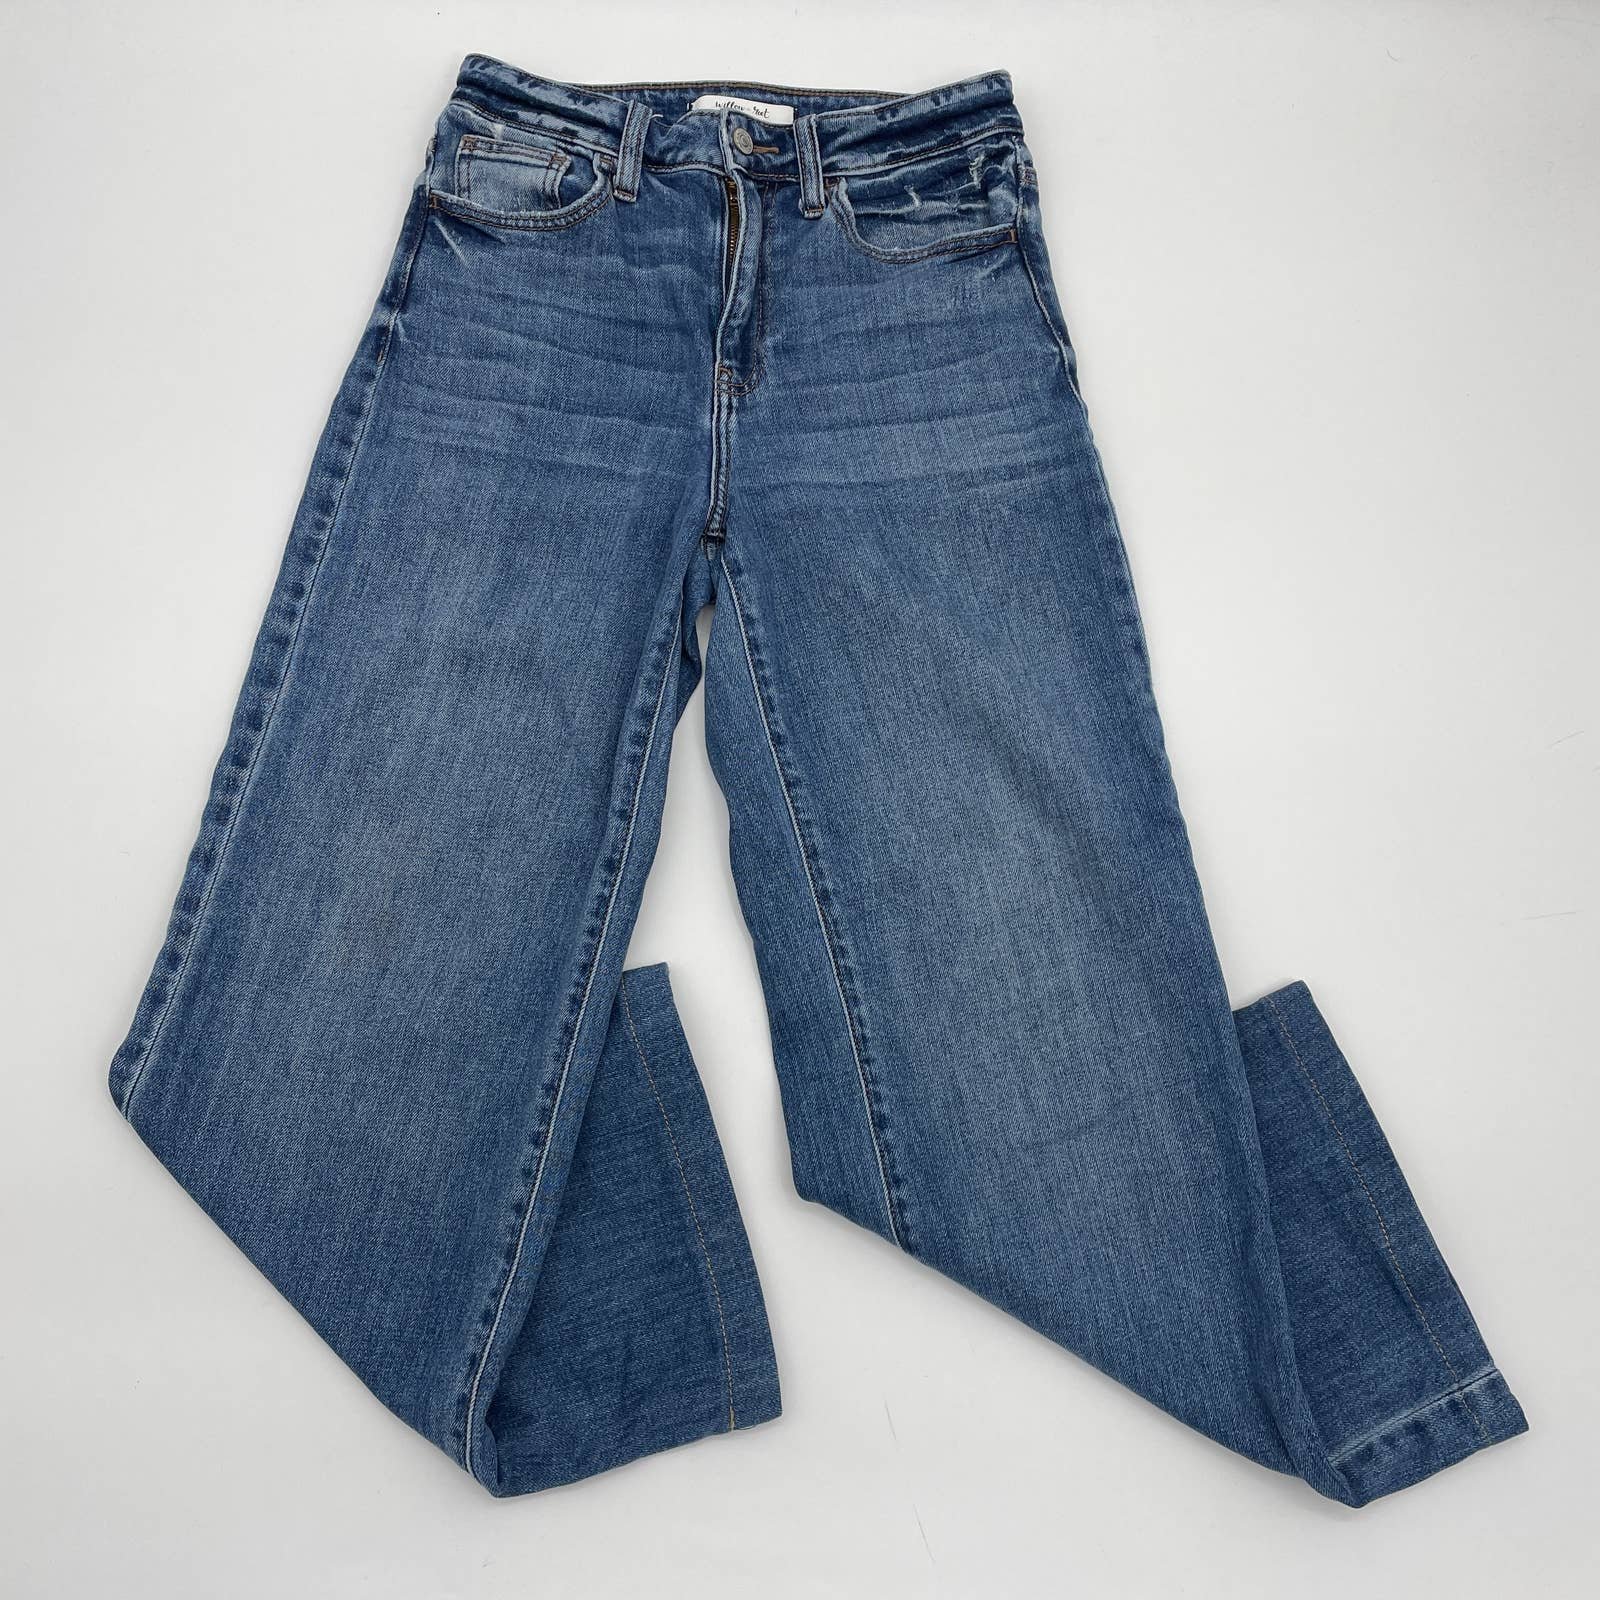 Personality WILLOW & ROOT Jeans By Buckle The Wide Leg 